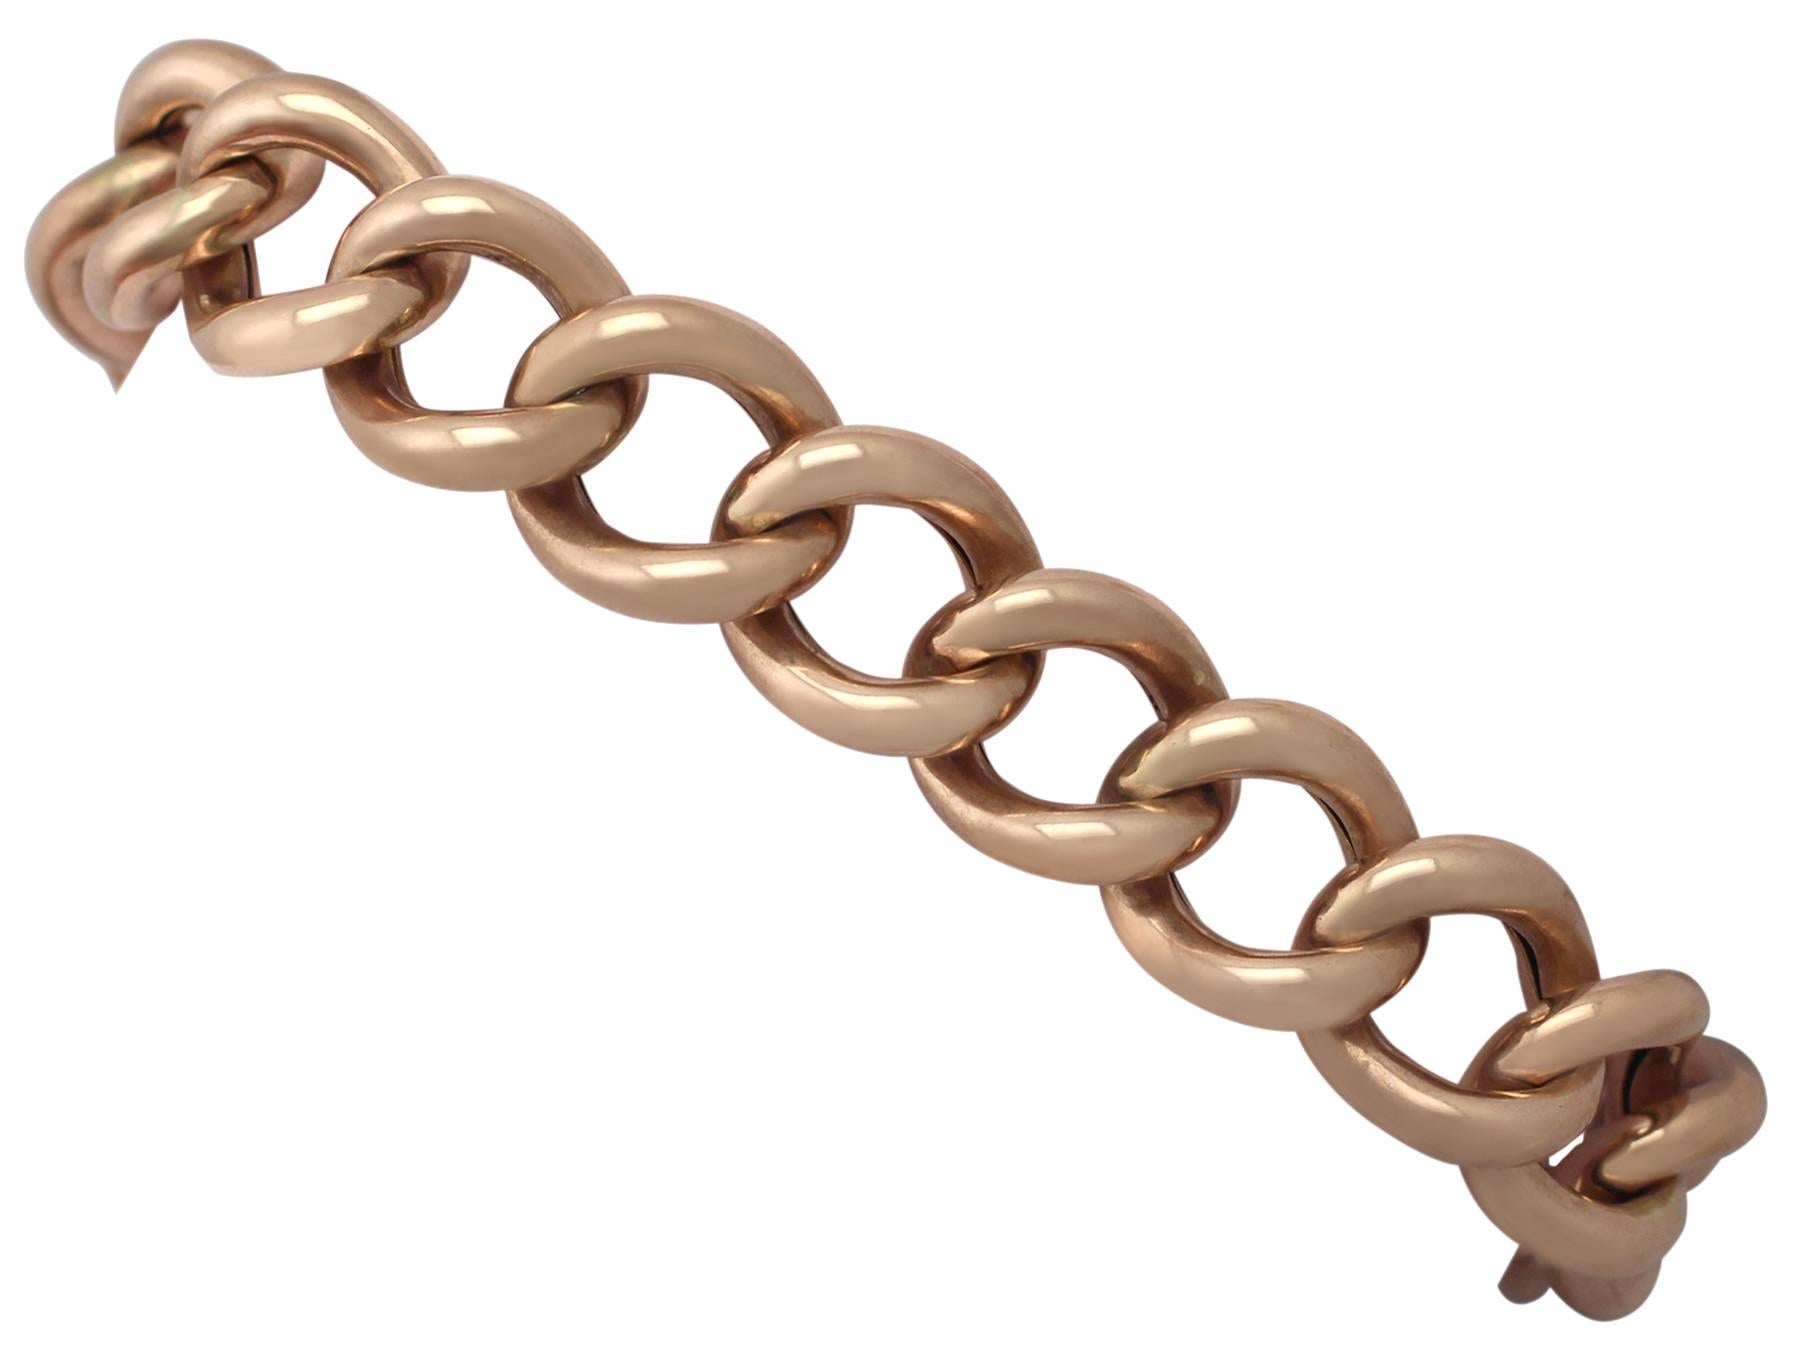 A fine, large and impressive antique 9 karat rose gold curb link bracelet with a heart shaped padlock clasp; part of our diverse antique jewelry and estate jewelry collections

This fine, large and impressive antique bracelet has been crafted in